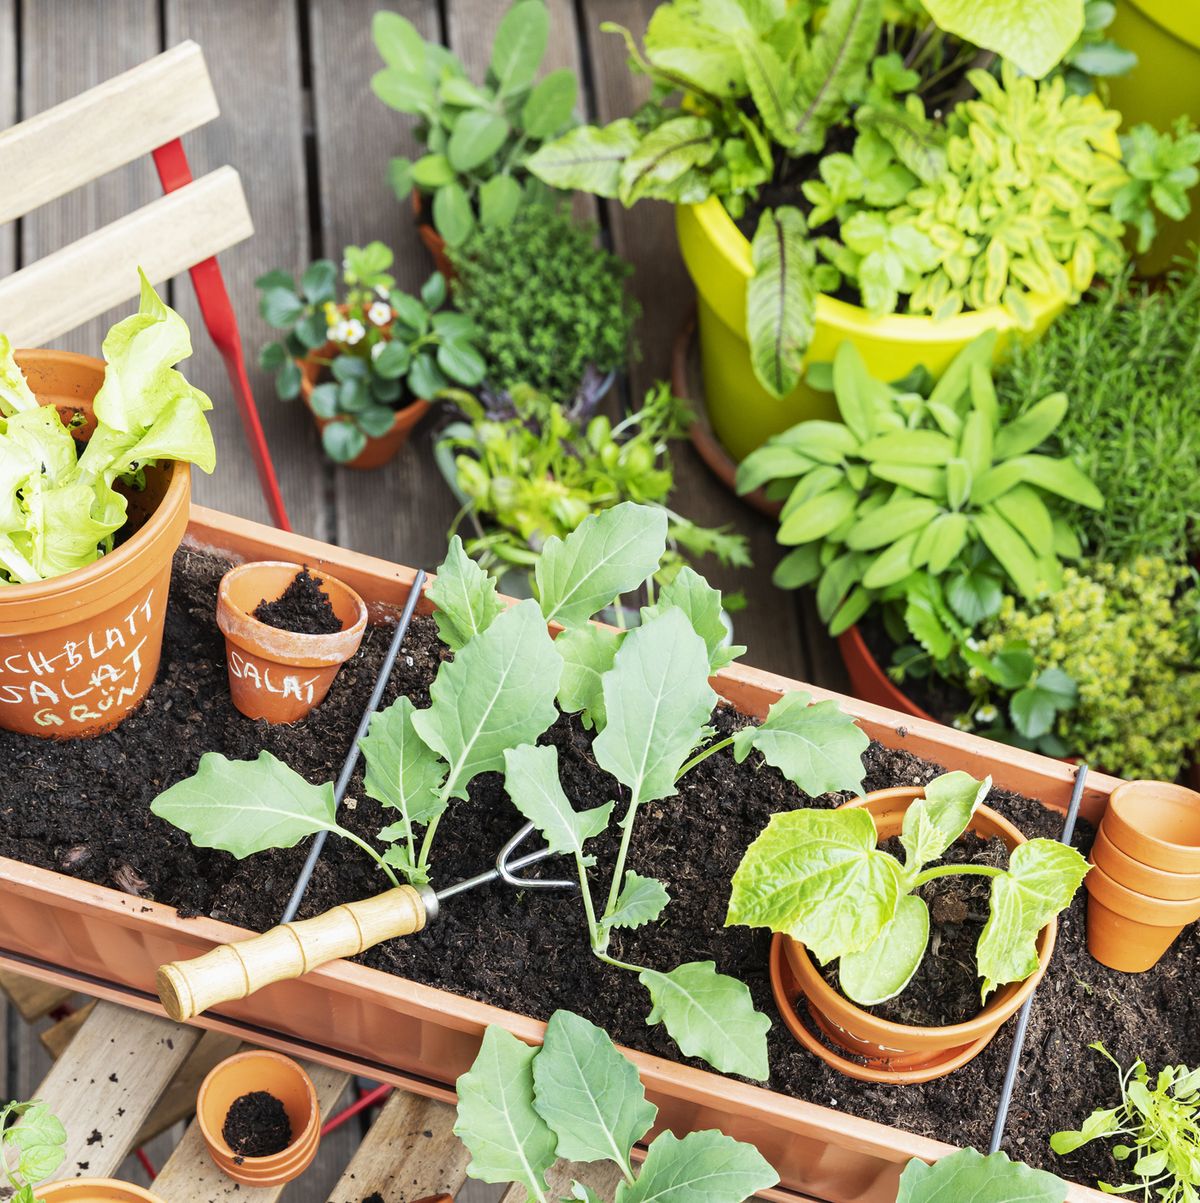 https://hips.hearstapps.com/hmg-prod/images/planting-of-various-herbs-and-vegetables-on-balcony-royalty-free-image-1680198865.jpg?crop=1.00xw:0.657xh;0,0.343xh&resize=1200:*